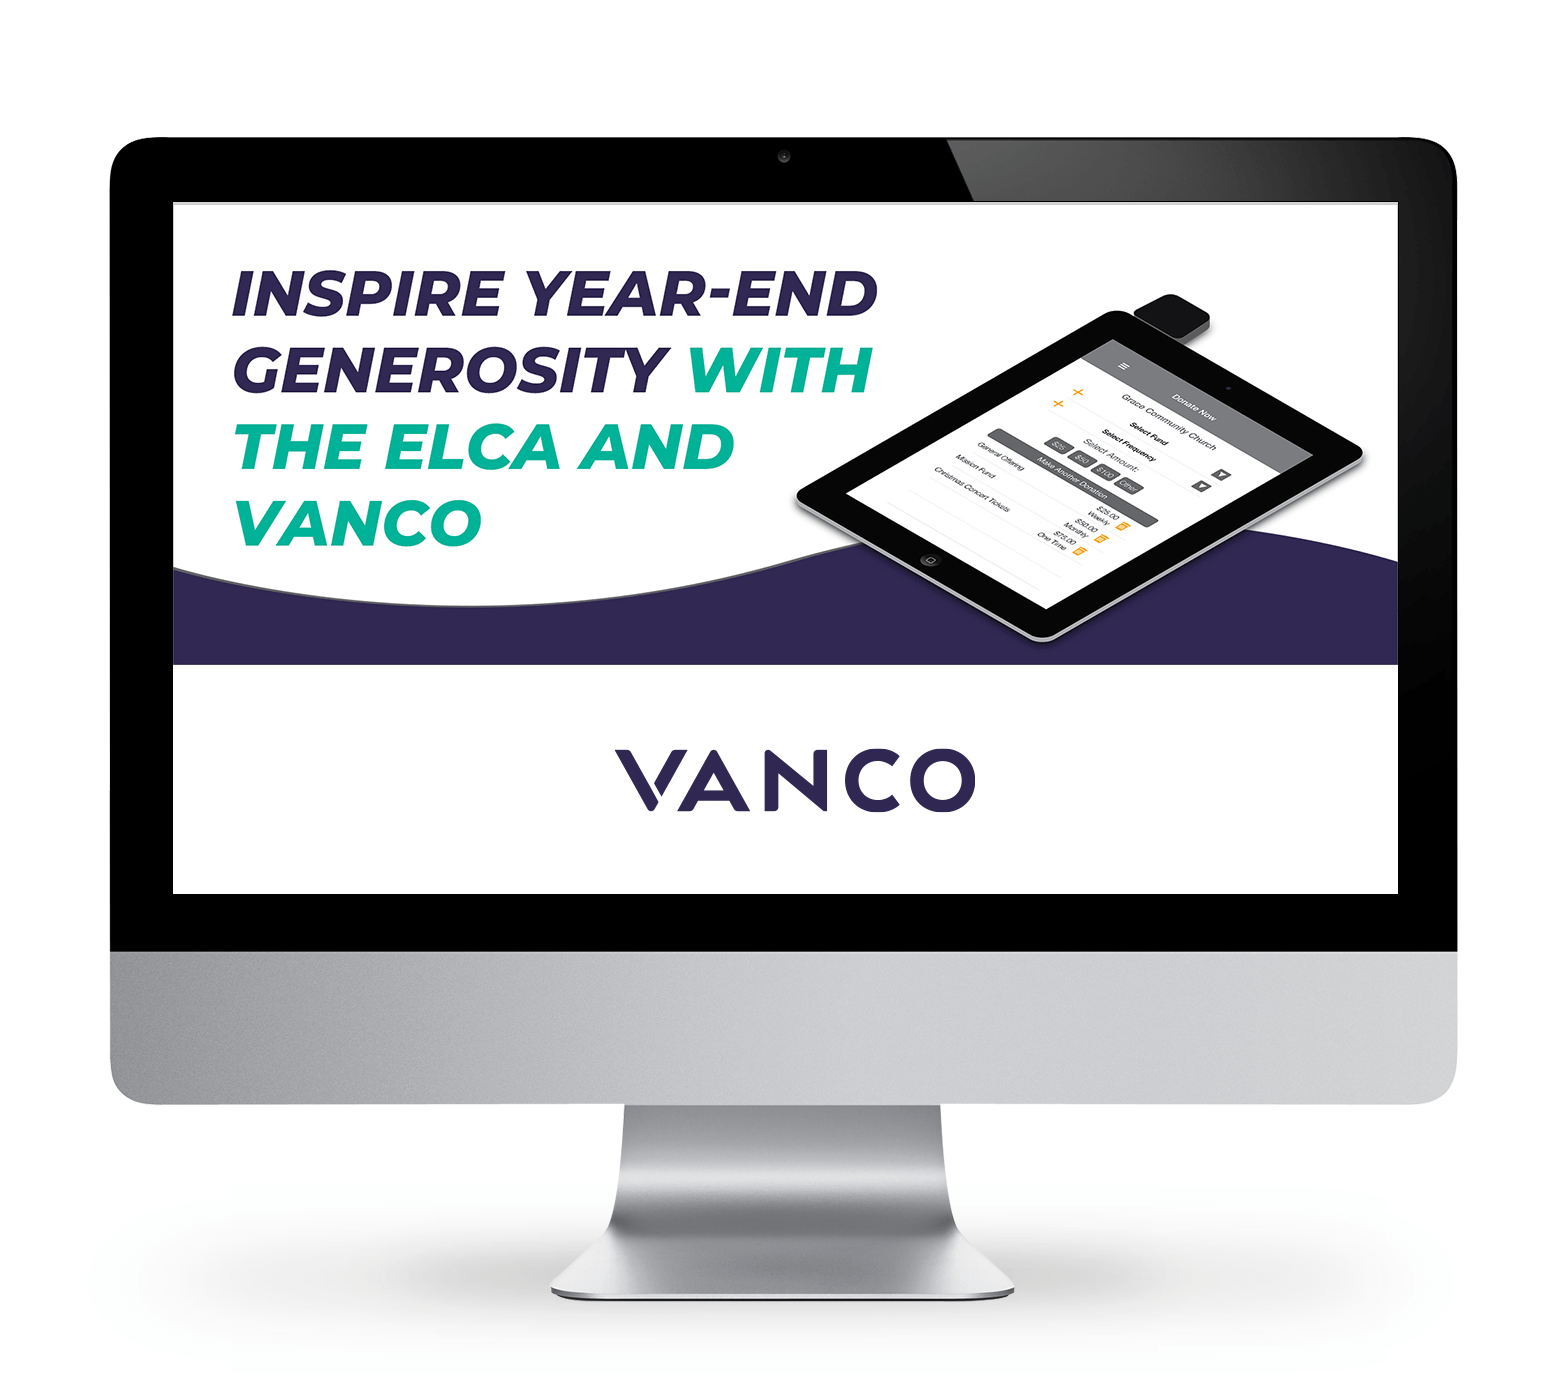 Inspire Year-End Generosity with the ELCA and Vanco